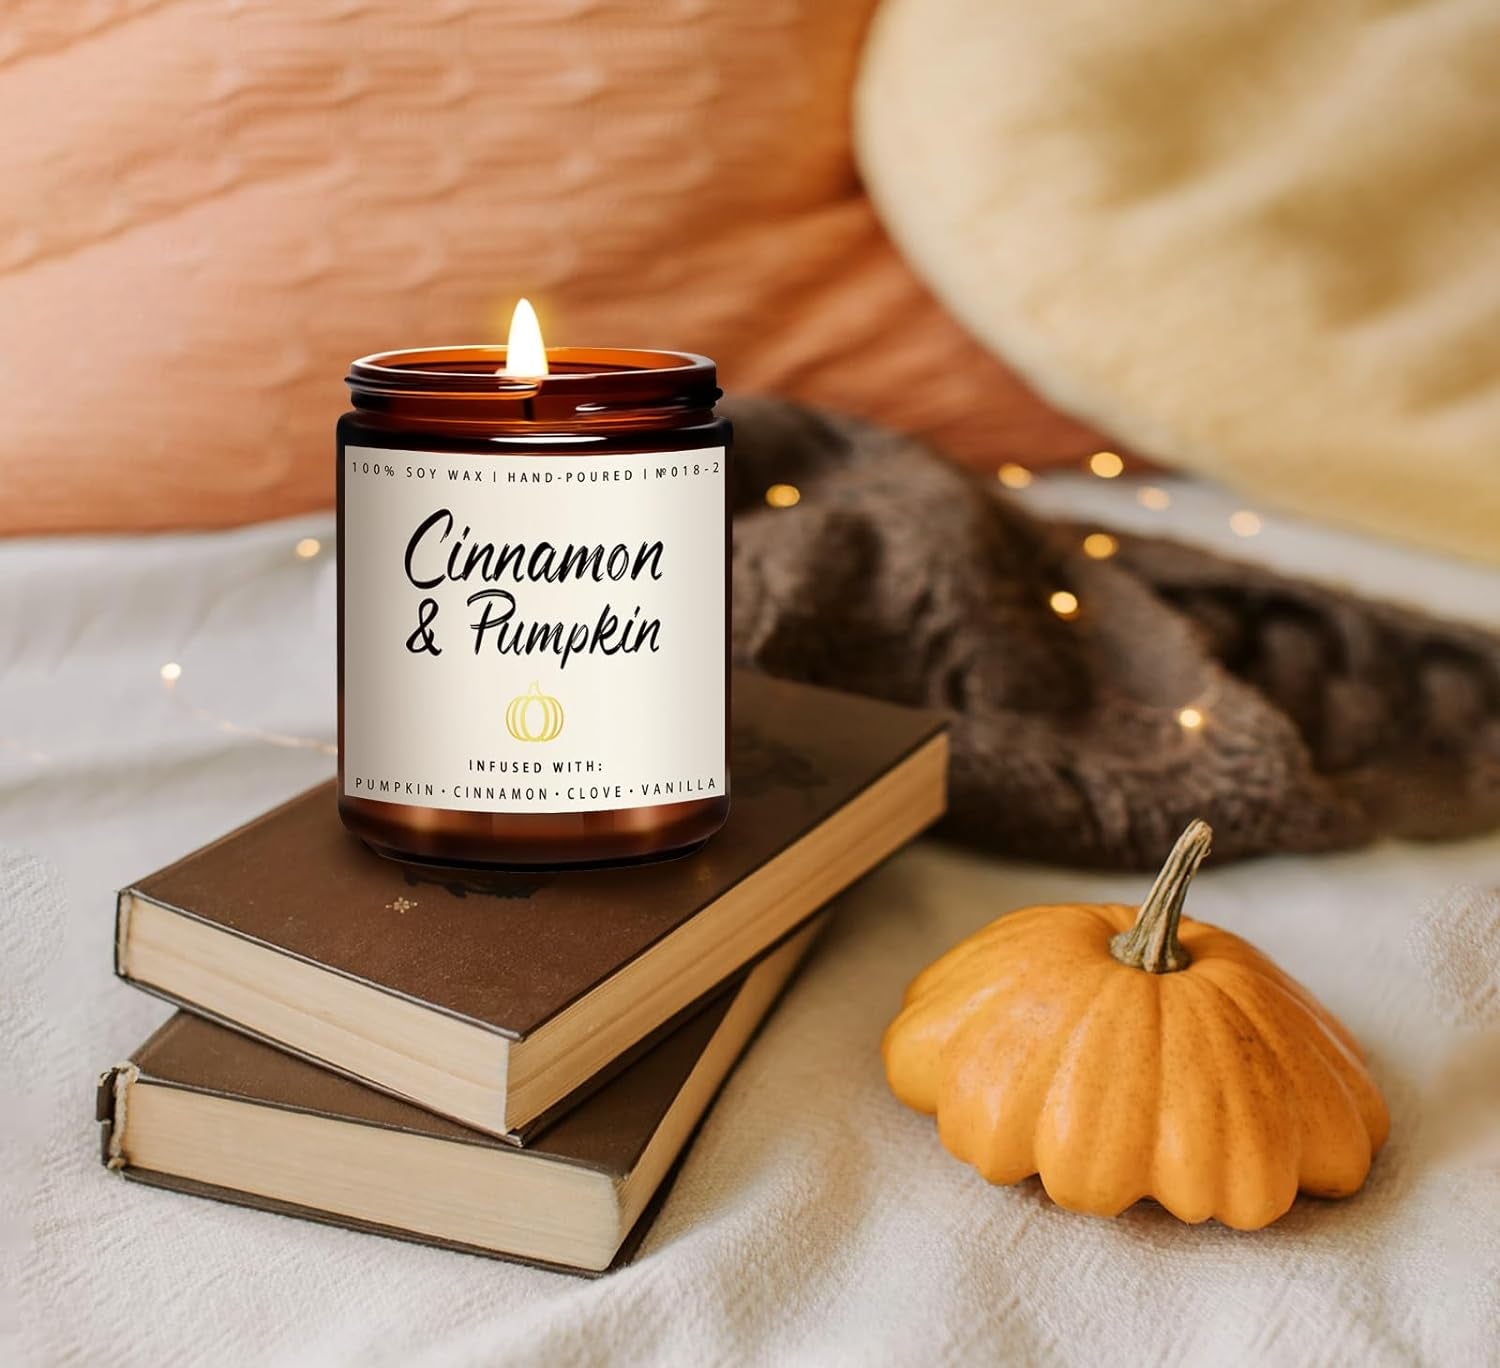 Fall Candle Set | Fall Scented Candles for Home, Scented Candles for Autumn Wreath/Pumpkin Spice/Cozy Season/Apple Pie/ - Scented Candle Set, Fall Gift for Women